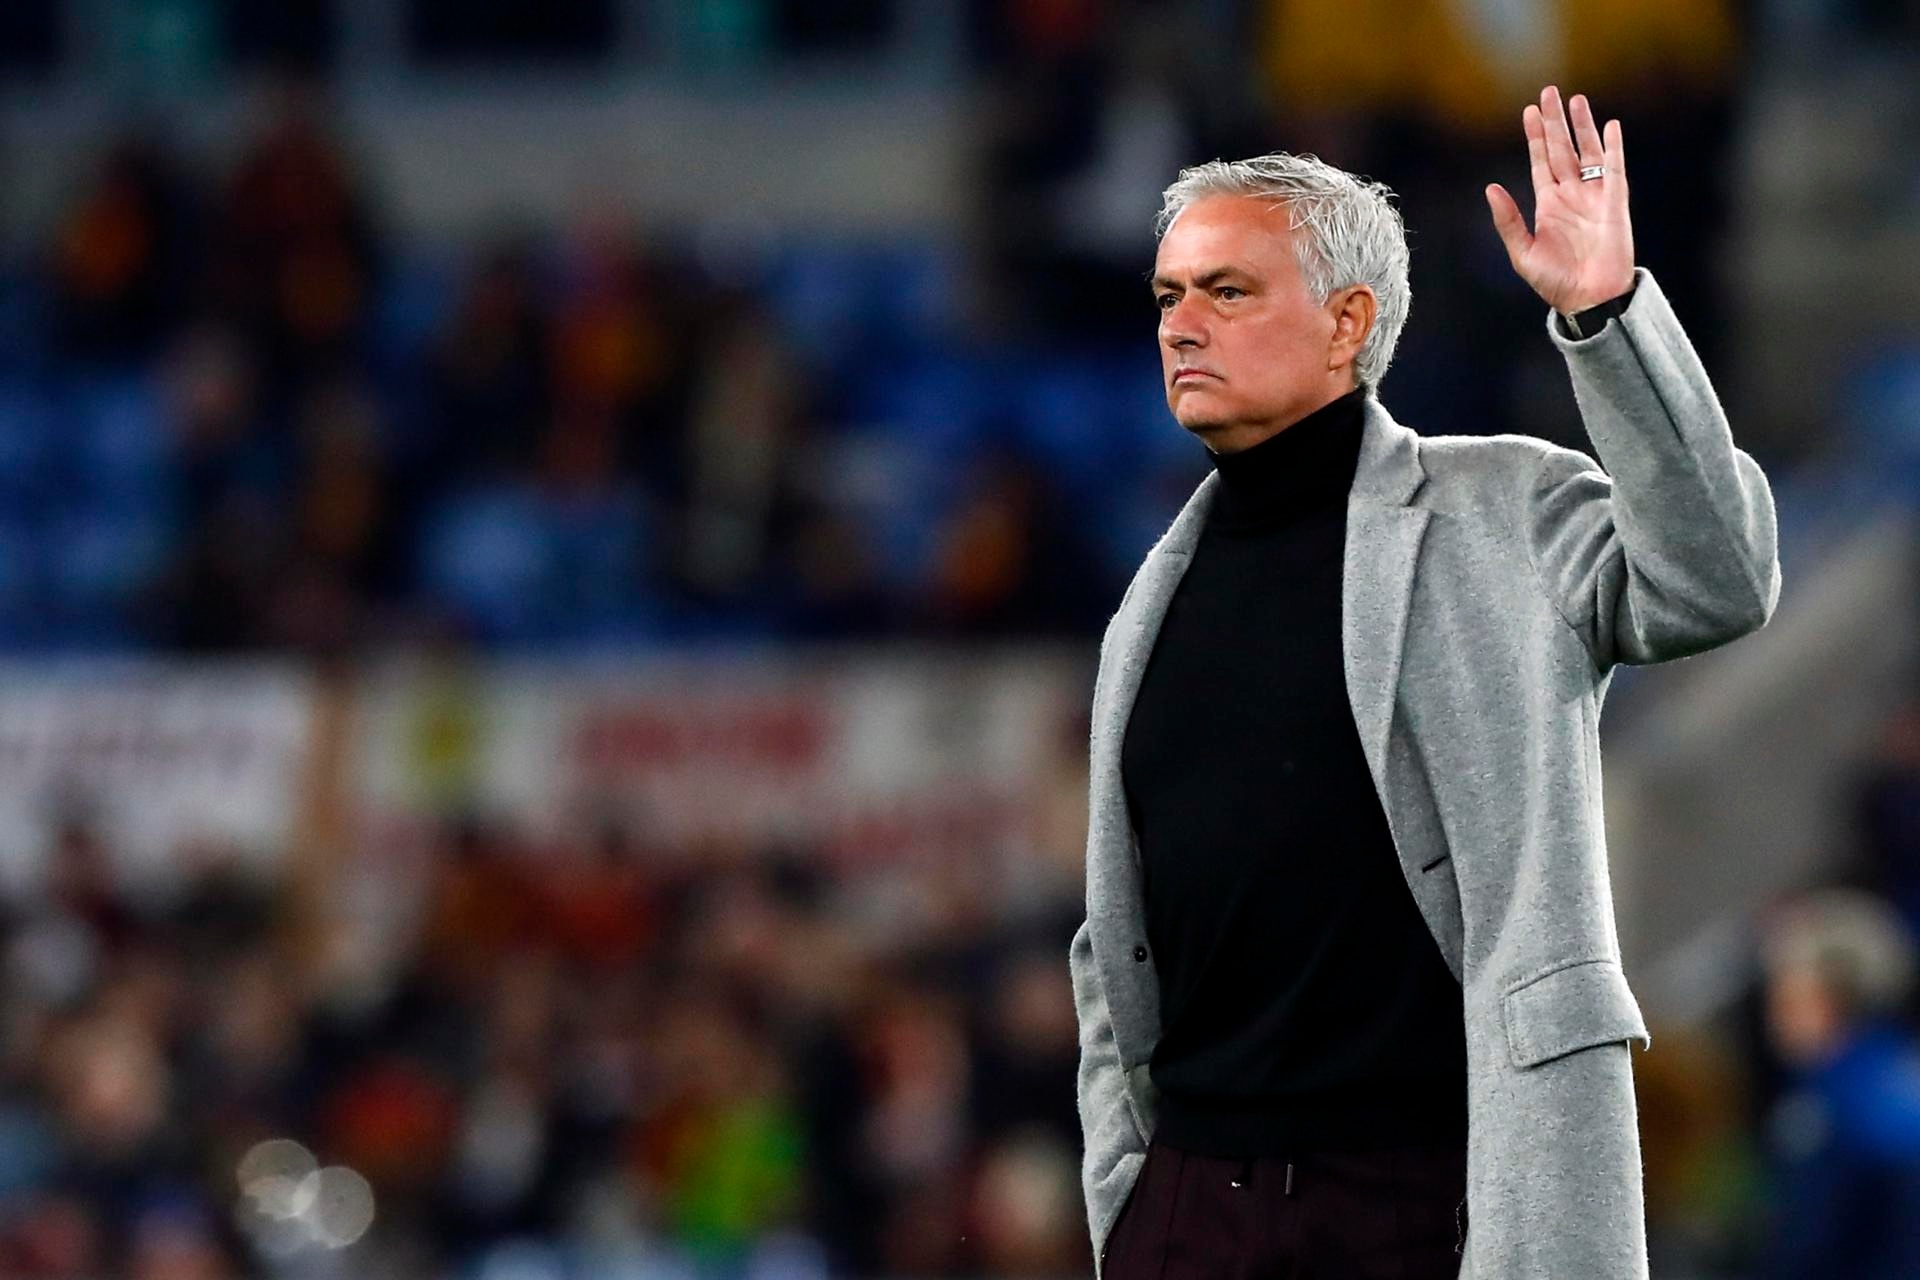 According to reports in Turkey, Jose Mourinho has reached a verbal agreement with Fenerbahce to sign a contract until 2026 with an option for a further season. The Portuguese coach leaves the big leagues after joining them in 2004 from Chelsea after winning the Champions League with Porto.